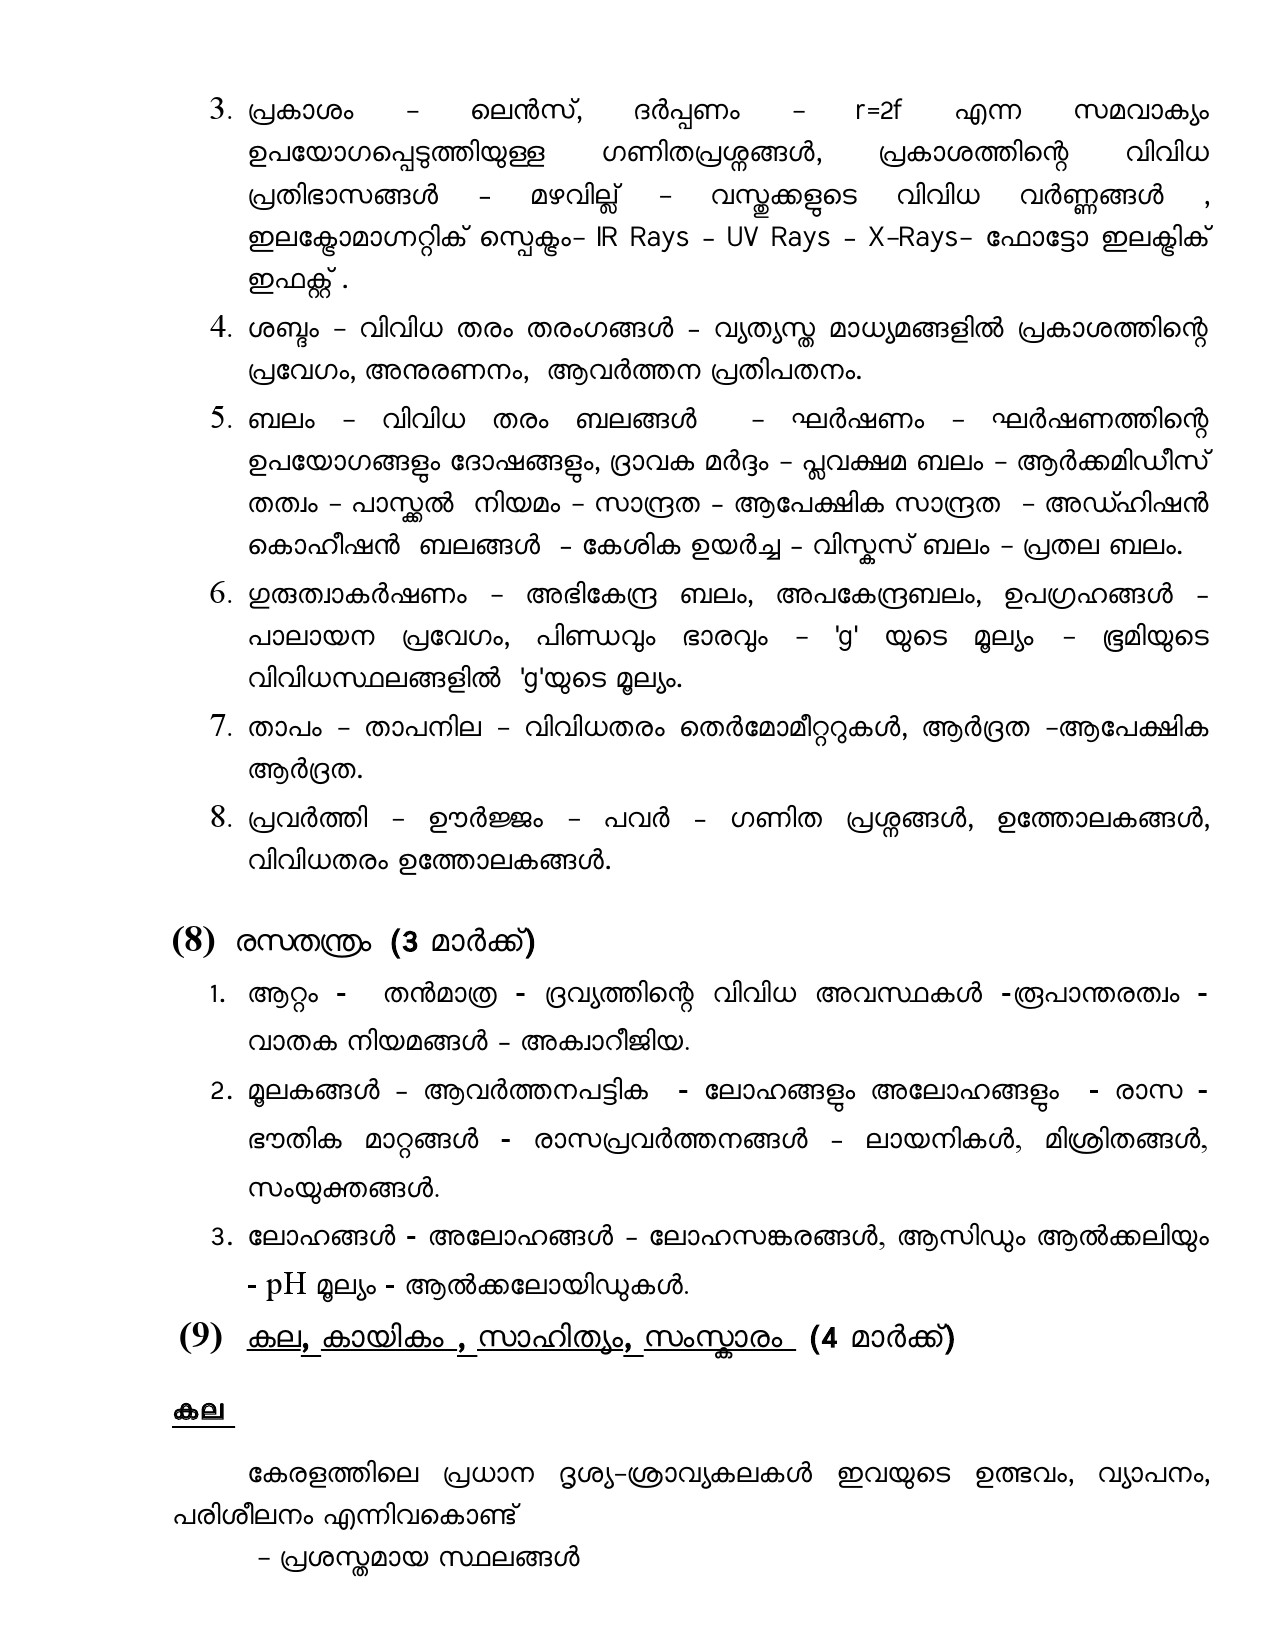 Civil Police Officer Final Examination Syllabus For Plus Two Level - Notification Image 5